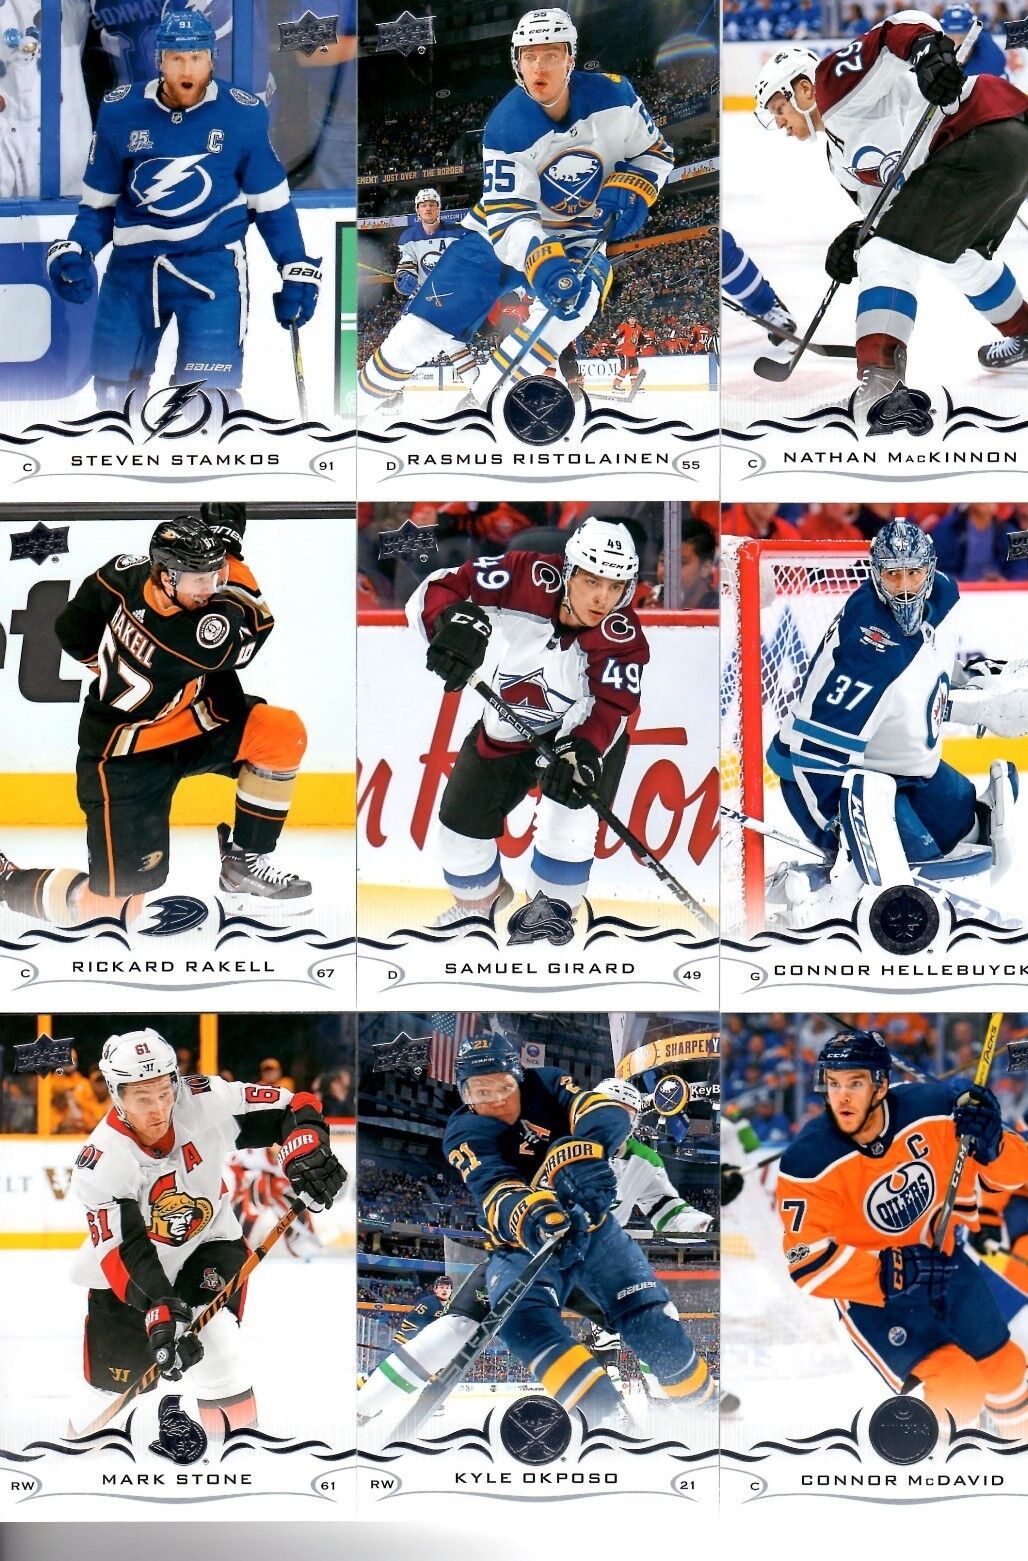 Image 1 - 2018-19 Upper Deck Series 1 Complete Your Set Pick Cards #1-200. 5 for $1 add.25